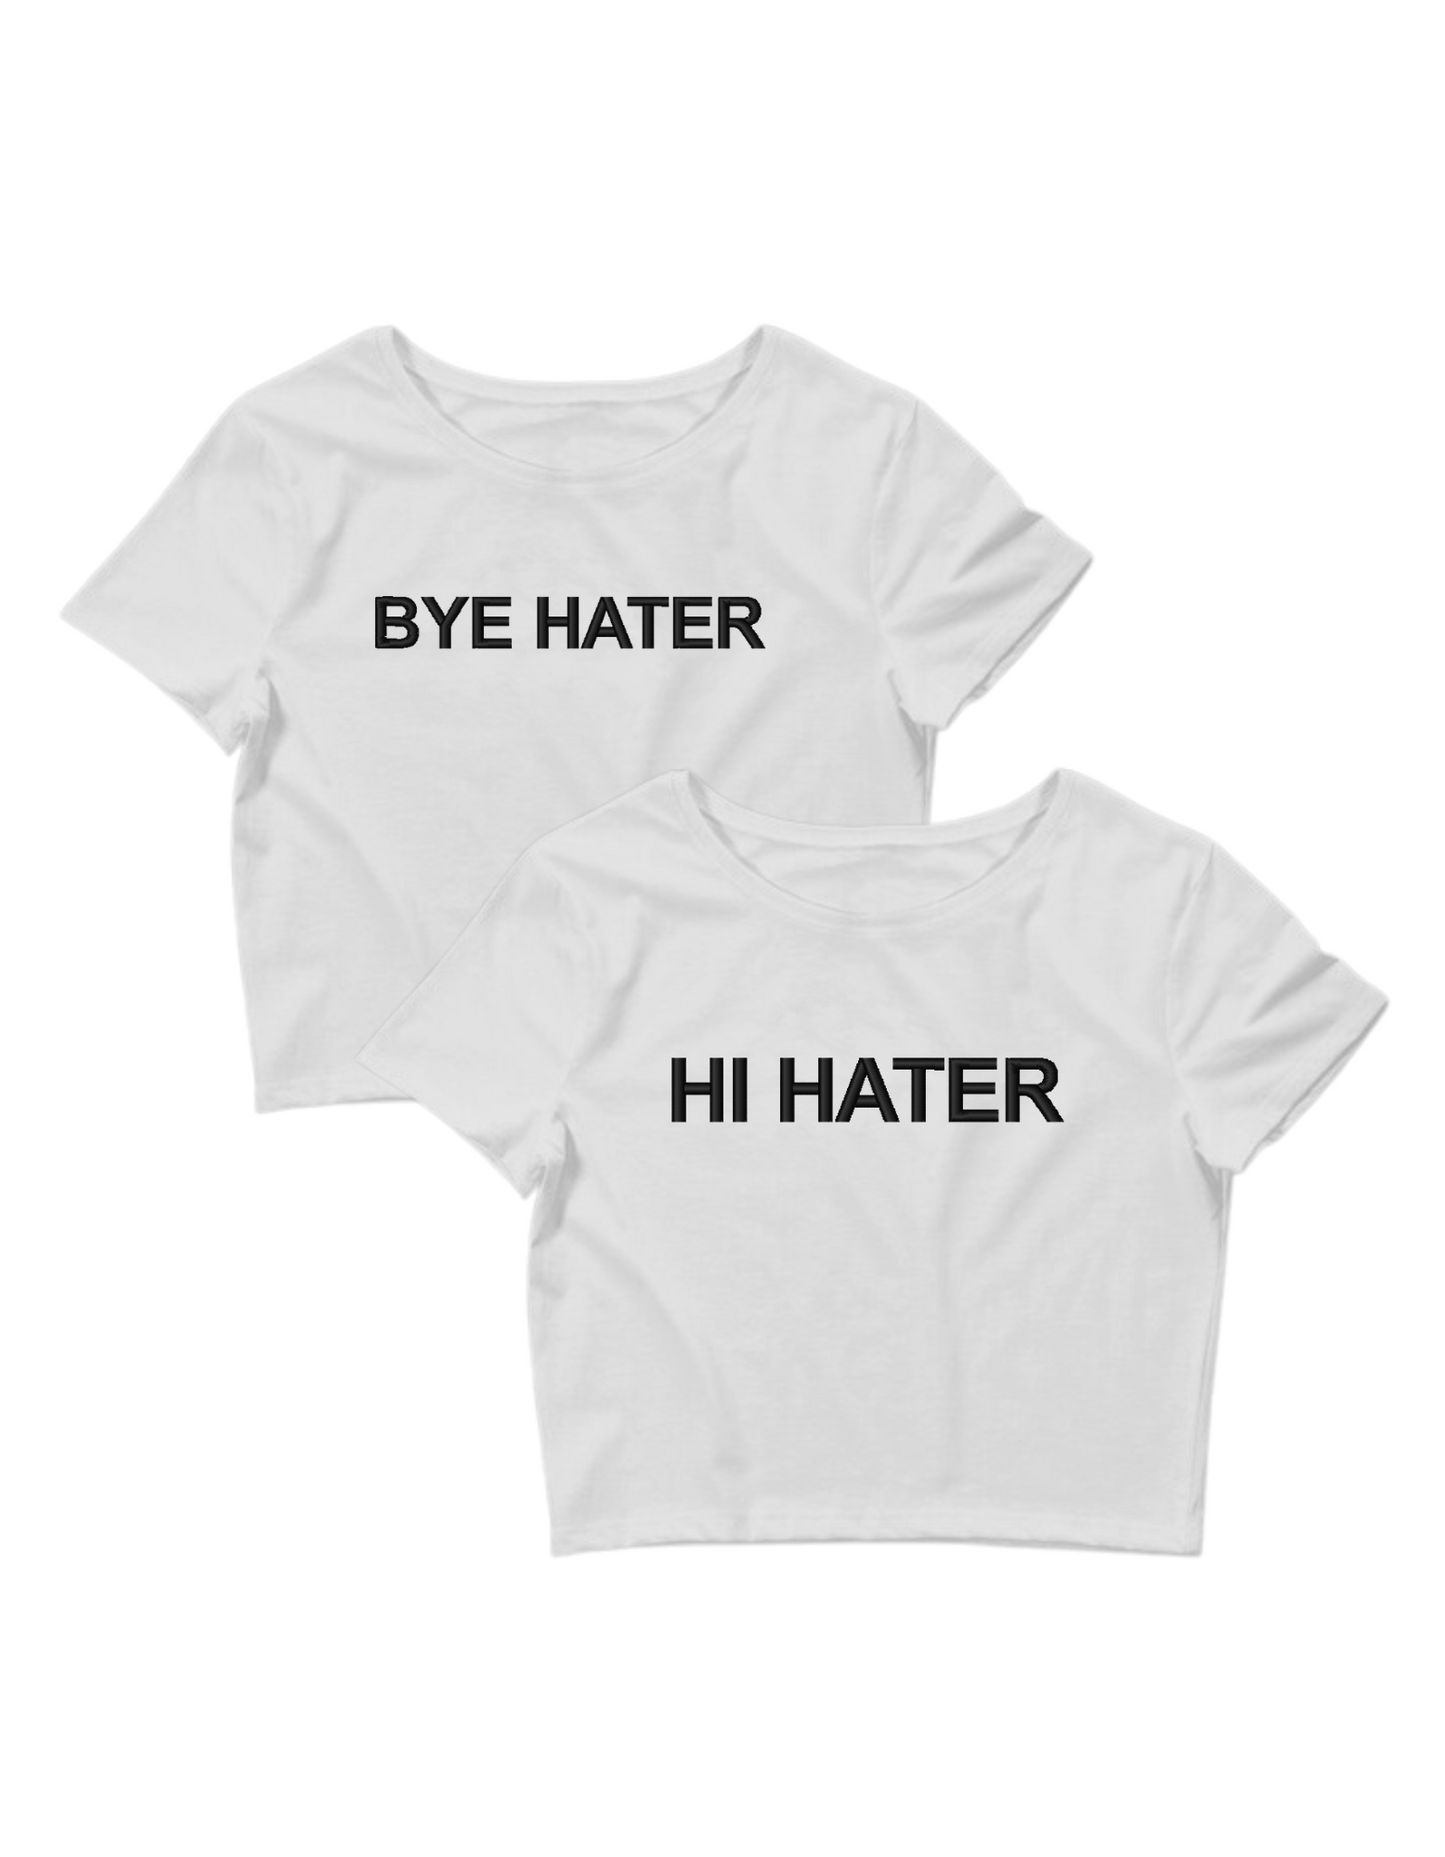 Embroidered ‘Hi Hater Bye Hater’ Cropped, Short Sleeve, Petite fit, Adult, Female, T-Shirt